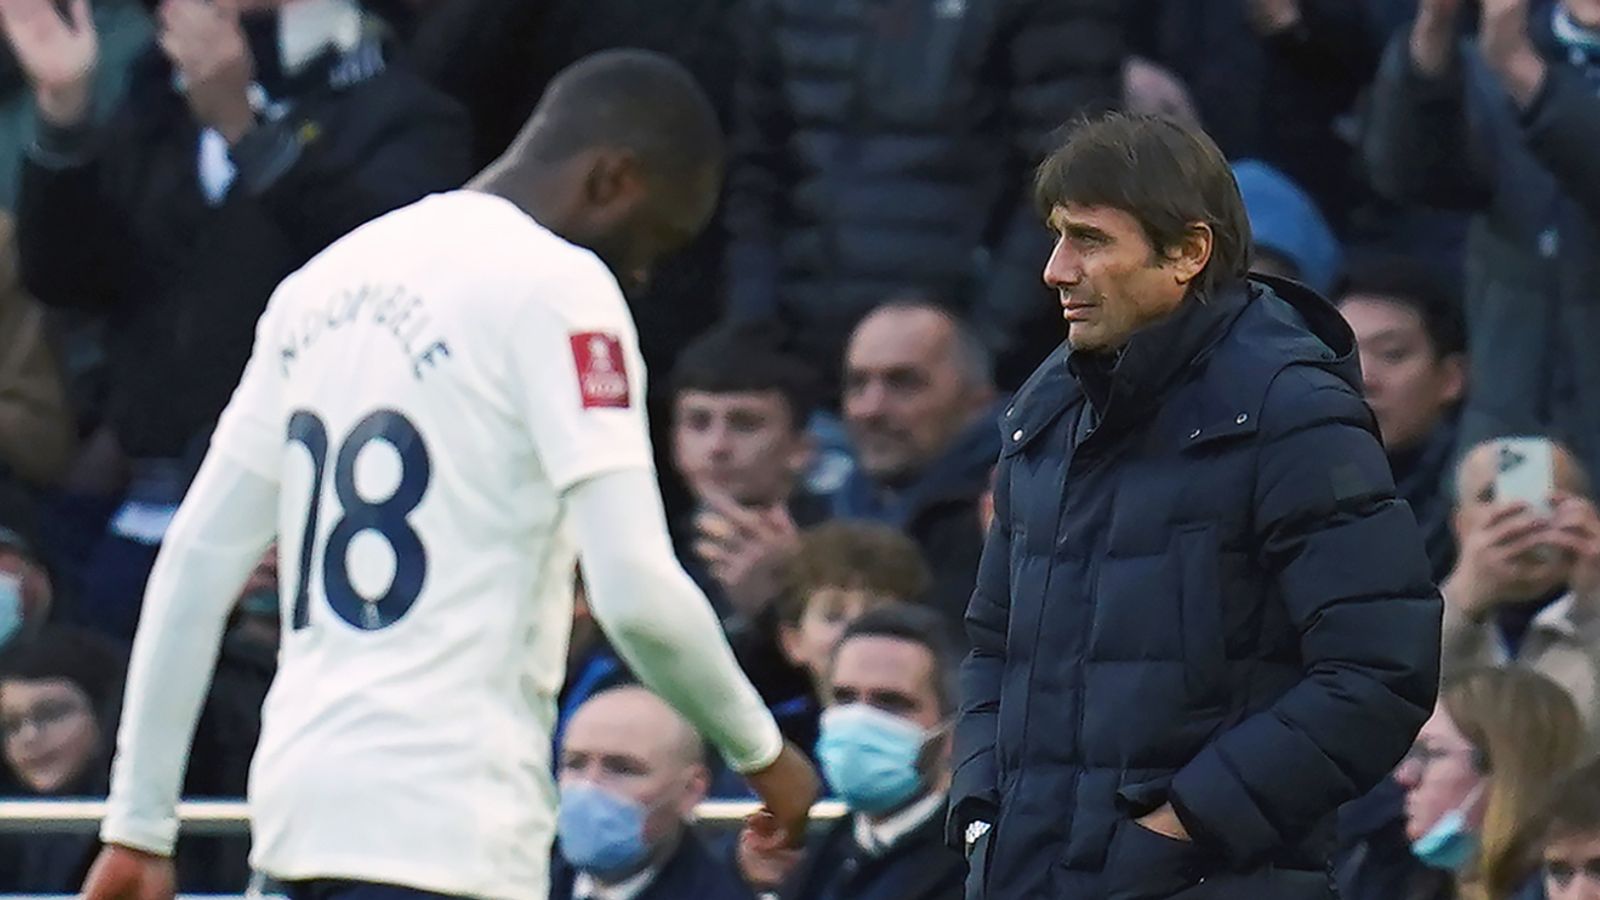 Tanguy Ndombele booed during Tottenham FA Cup win over Morecambe, Antonio Conte urges midfielder to 'change opinion'